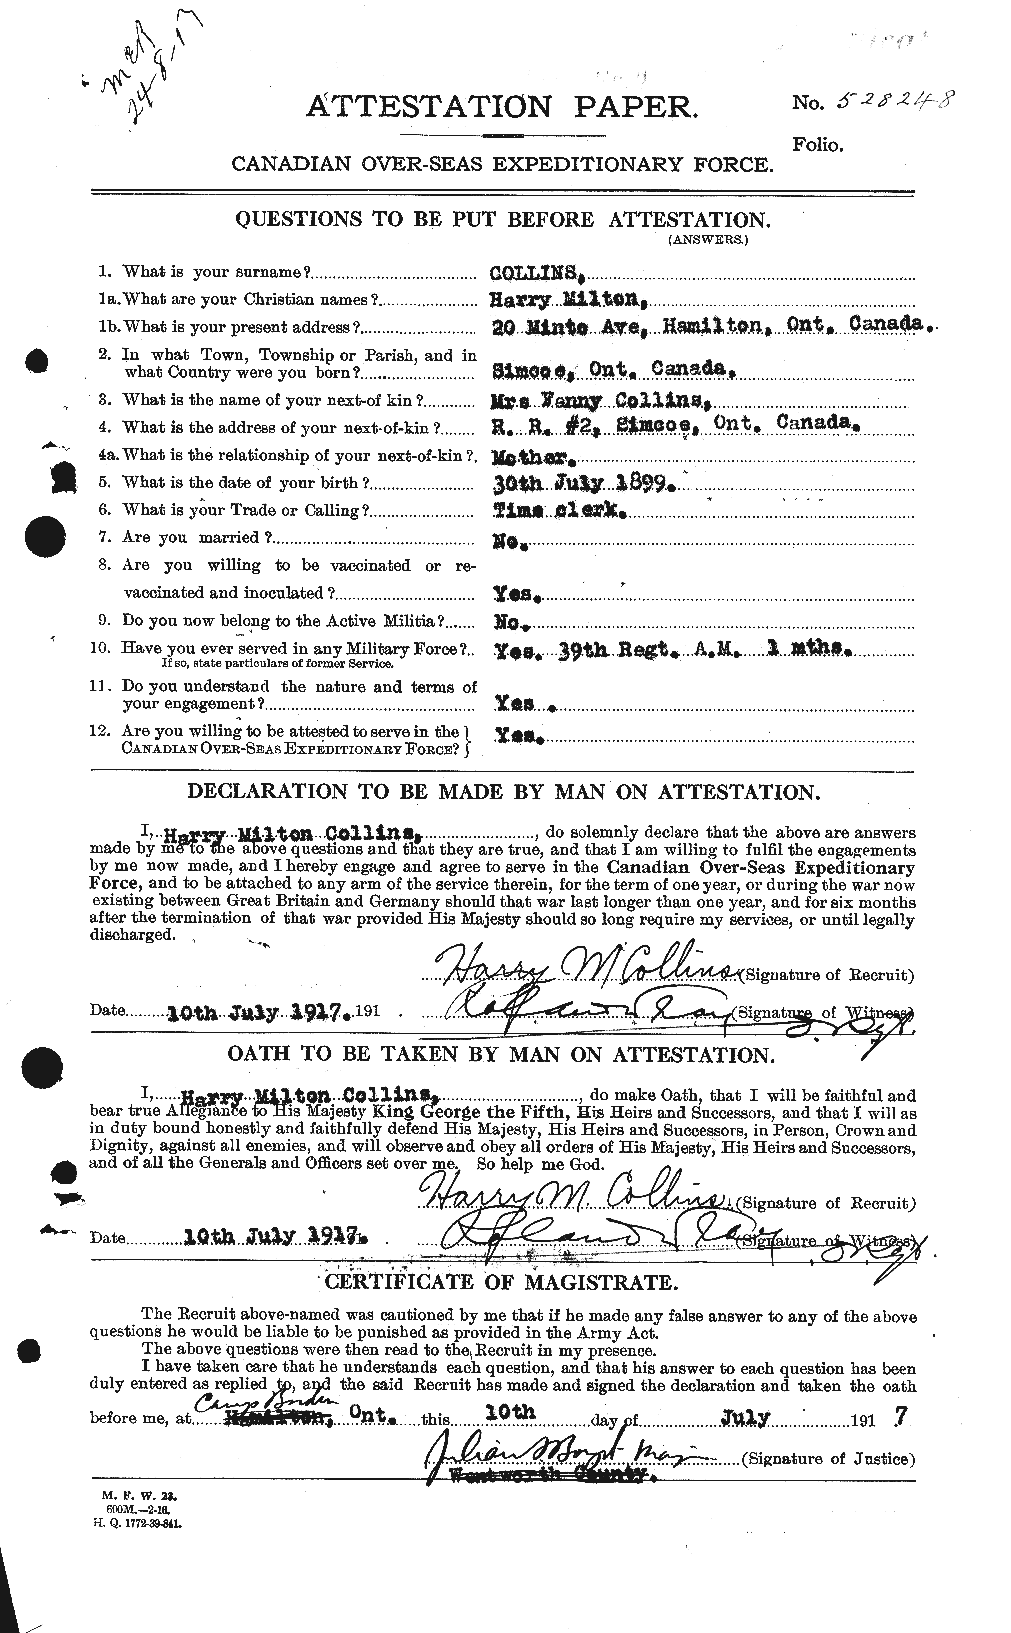 Personnel Records of the First World War - CEF 070015a